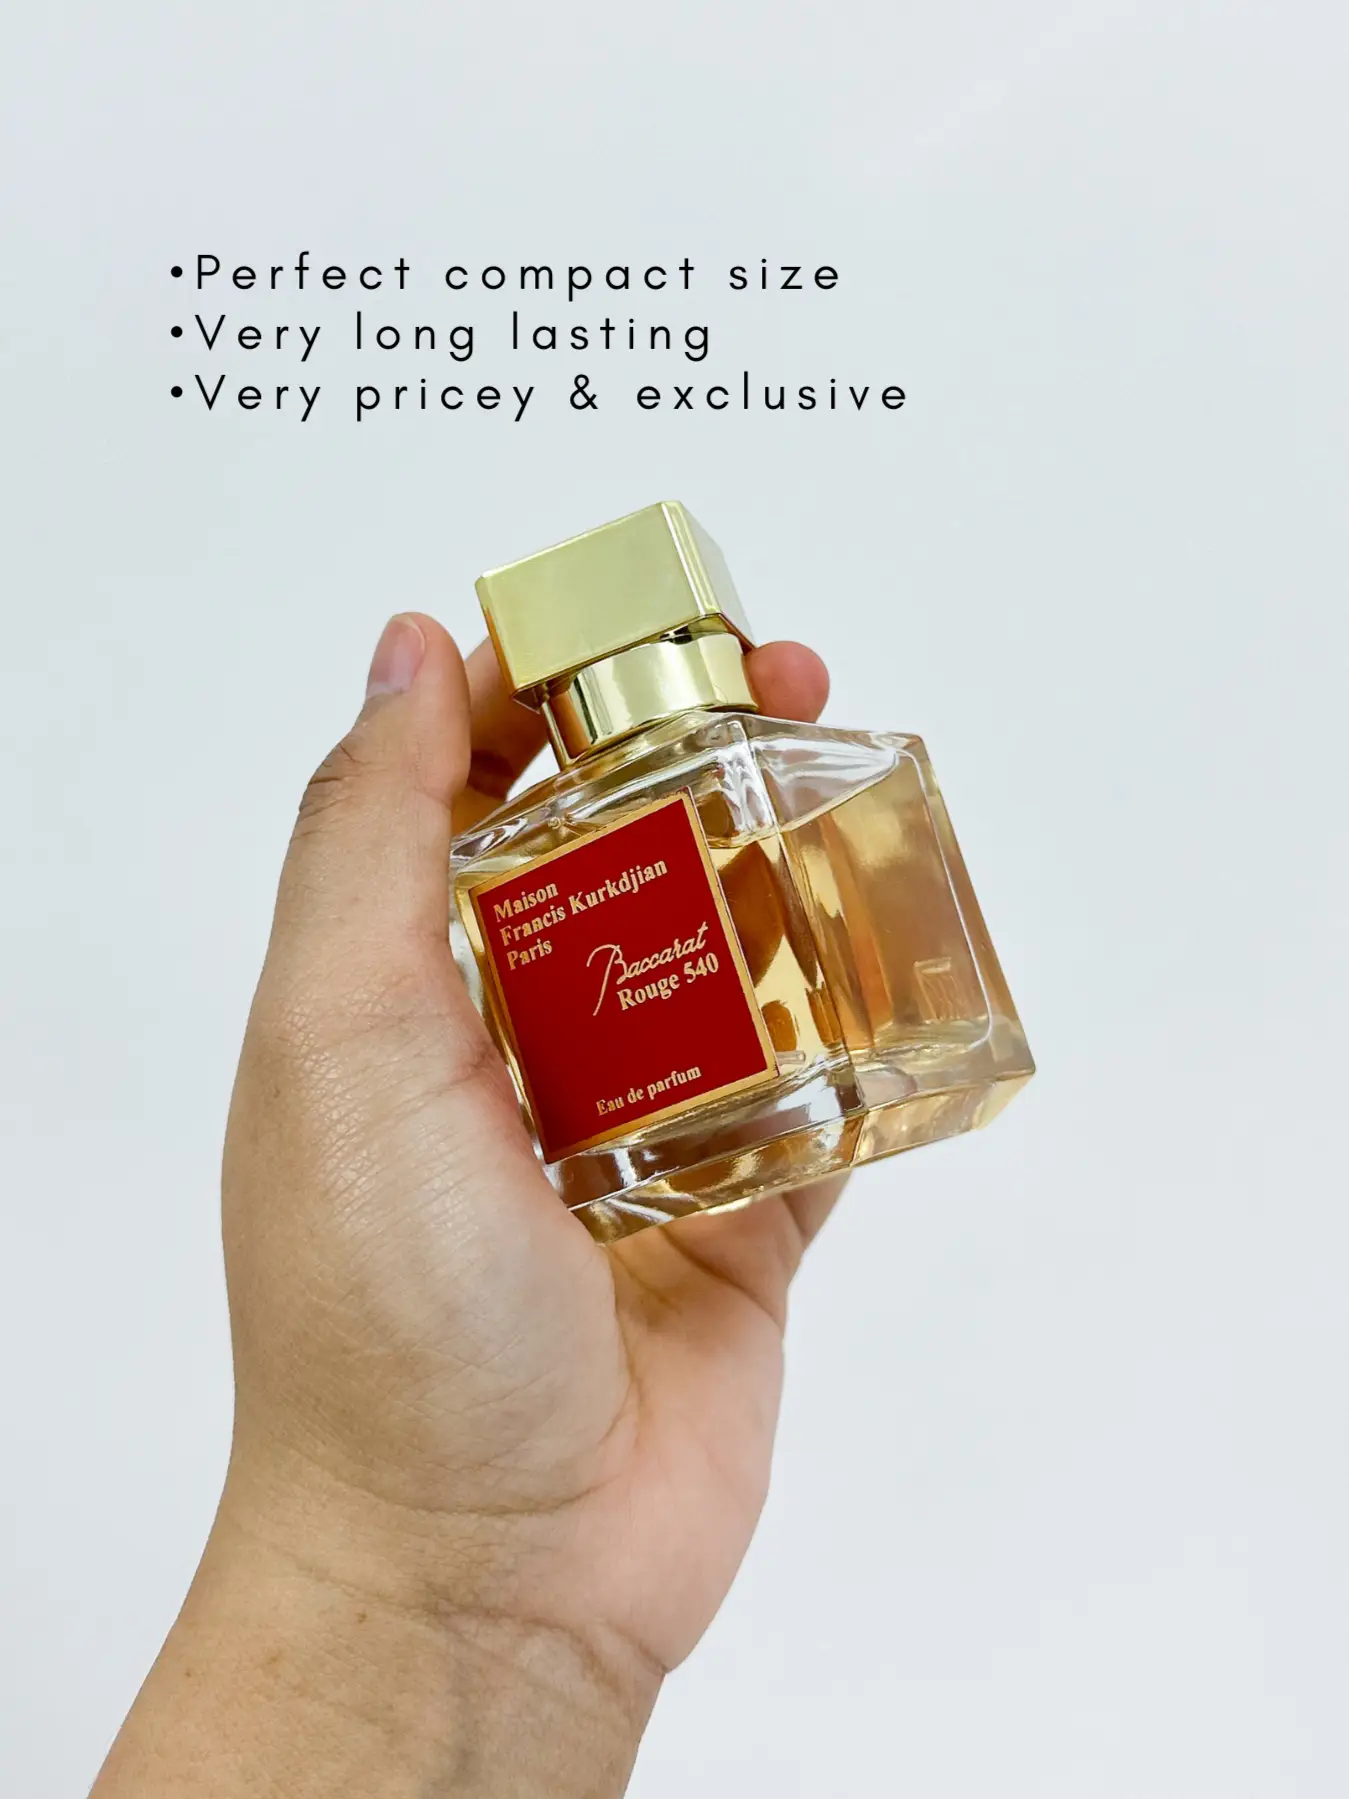 Why Baccarat Rouge 540 will always be my go-to perfume